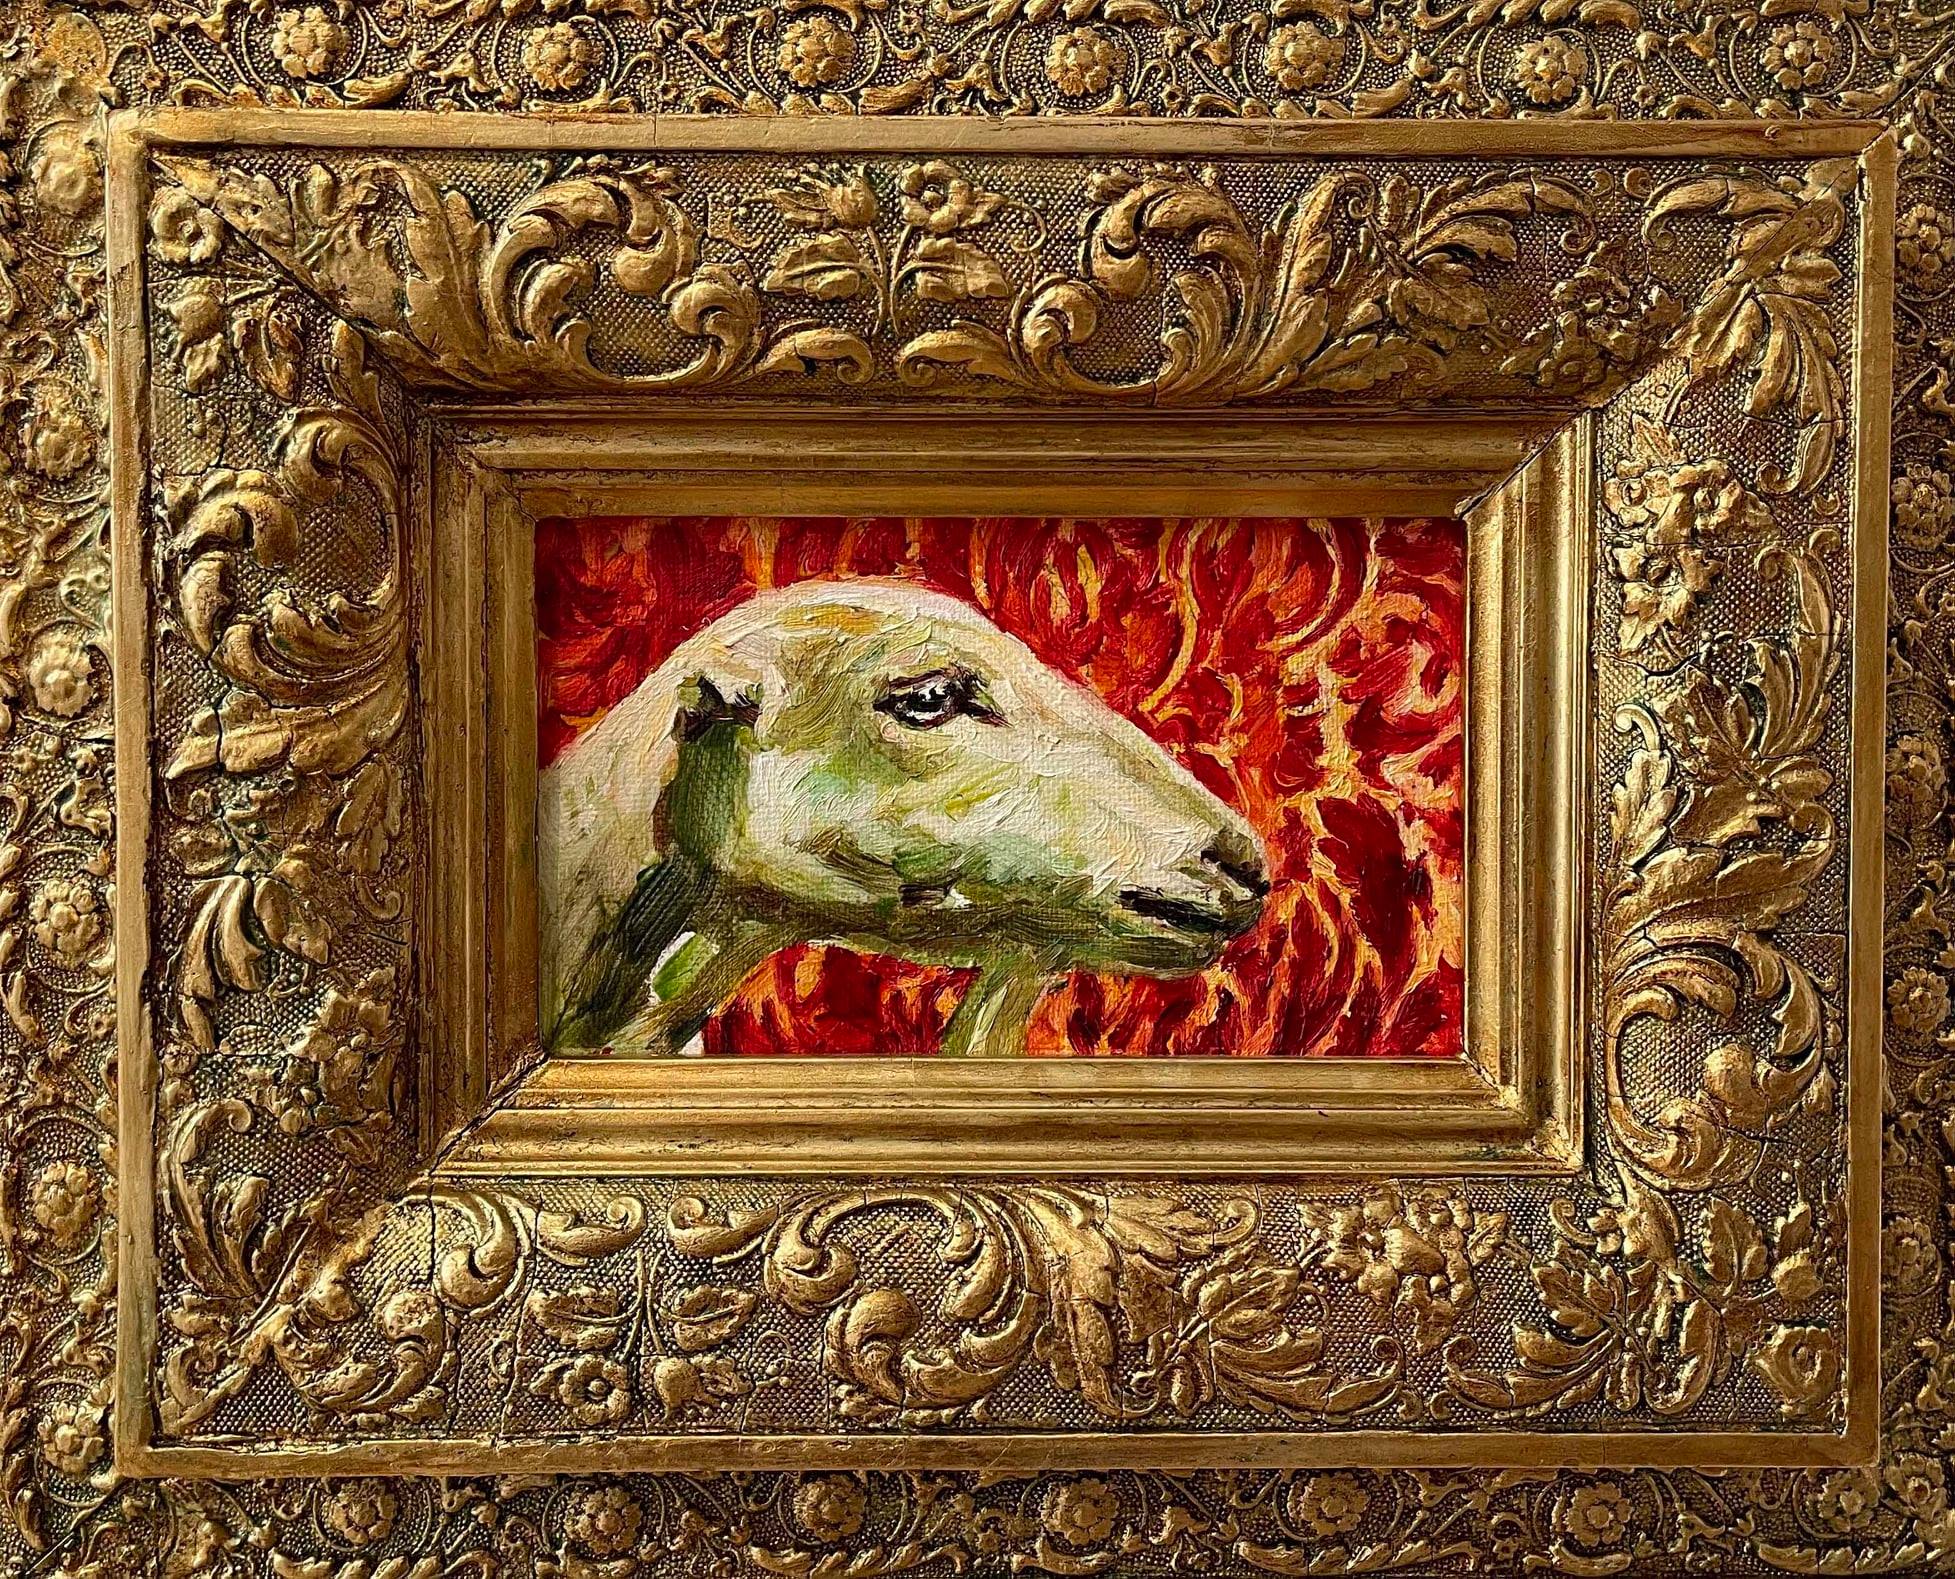 Small Smiling Goat - 2020, oil on canvas, 13,5 X 22 cm,  private collection, RO - 8